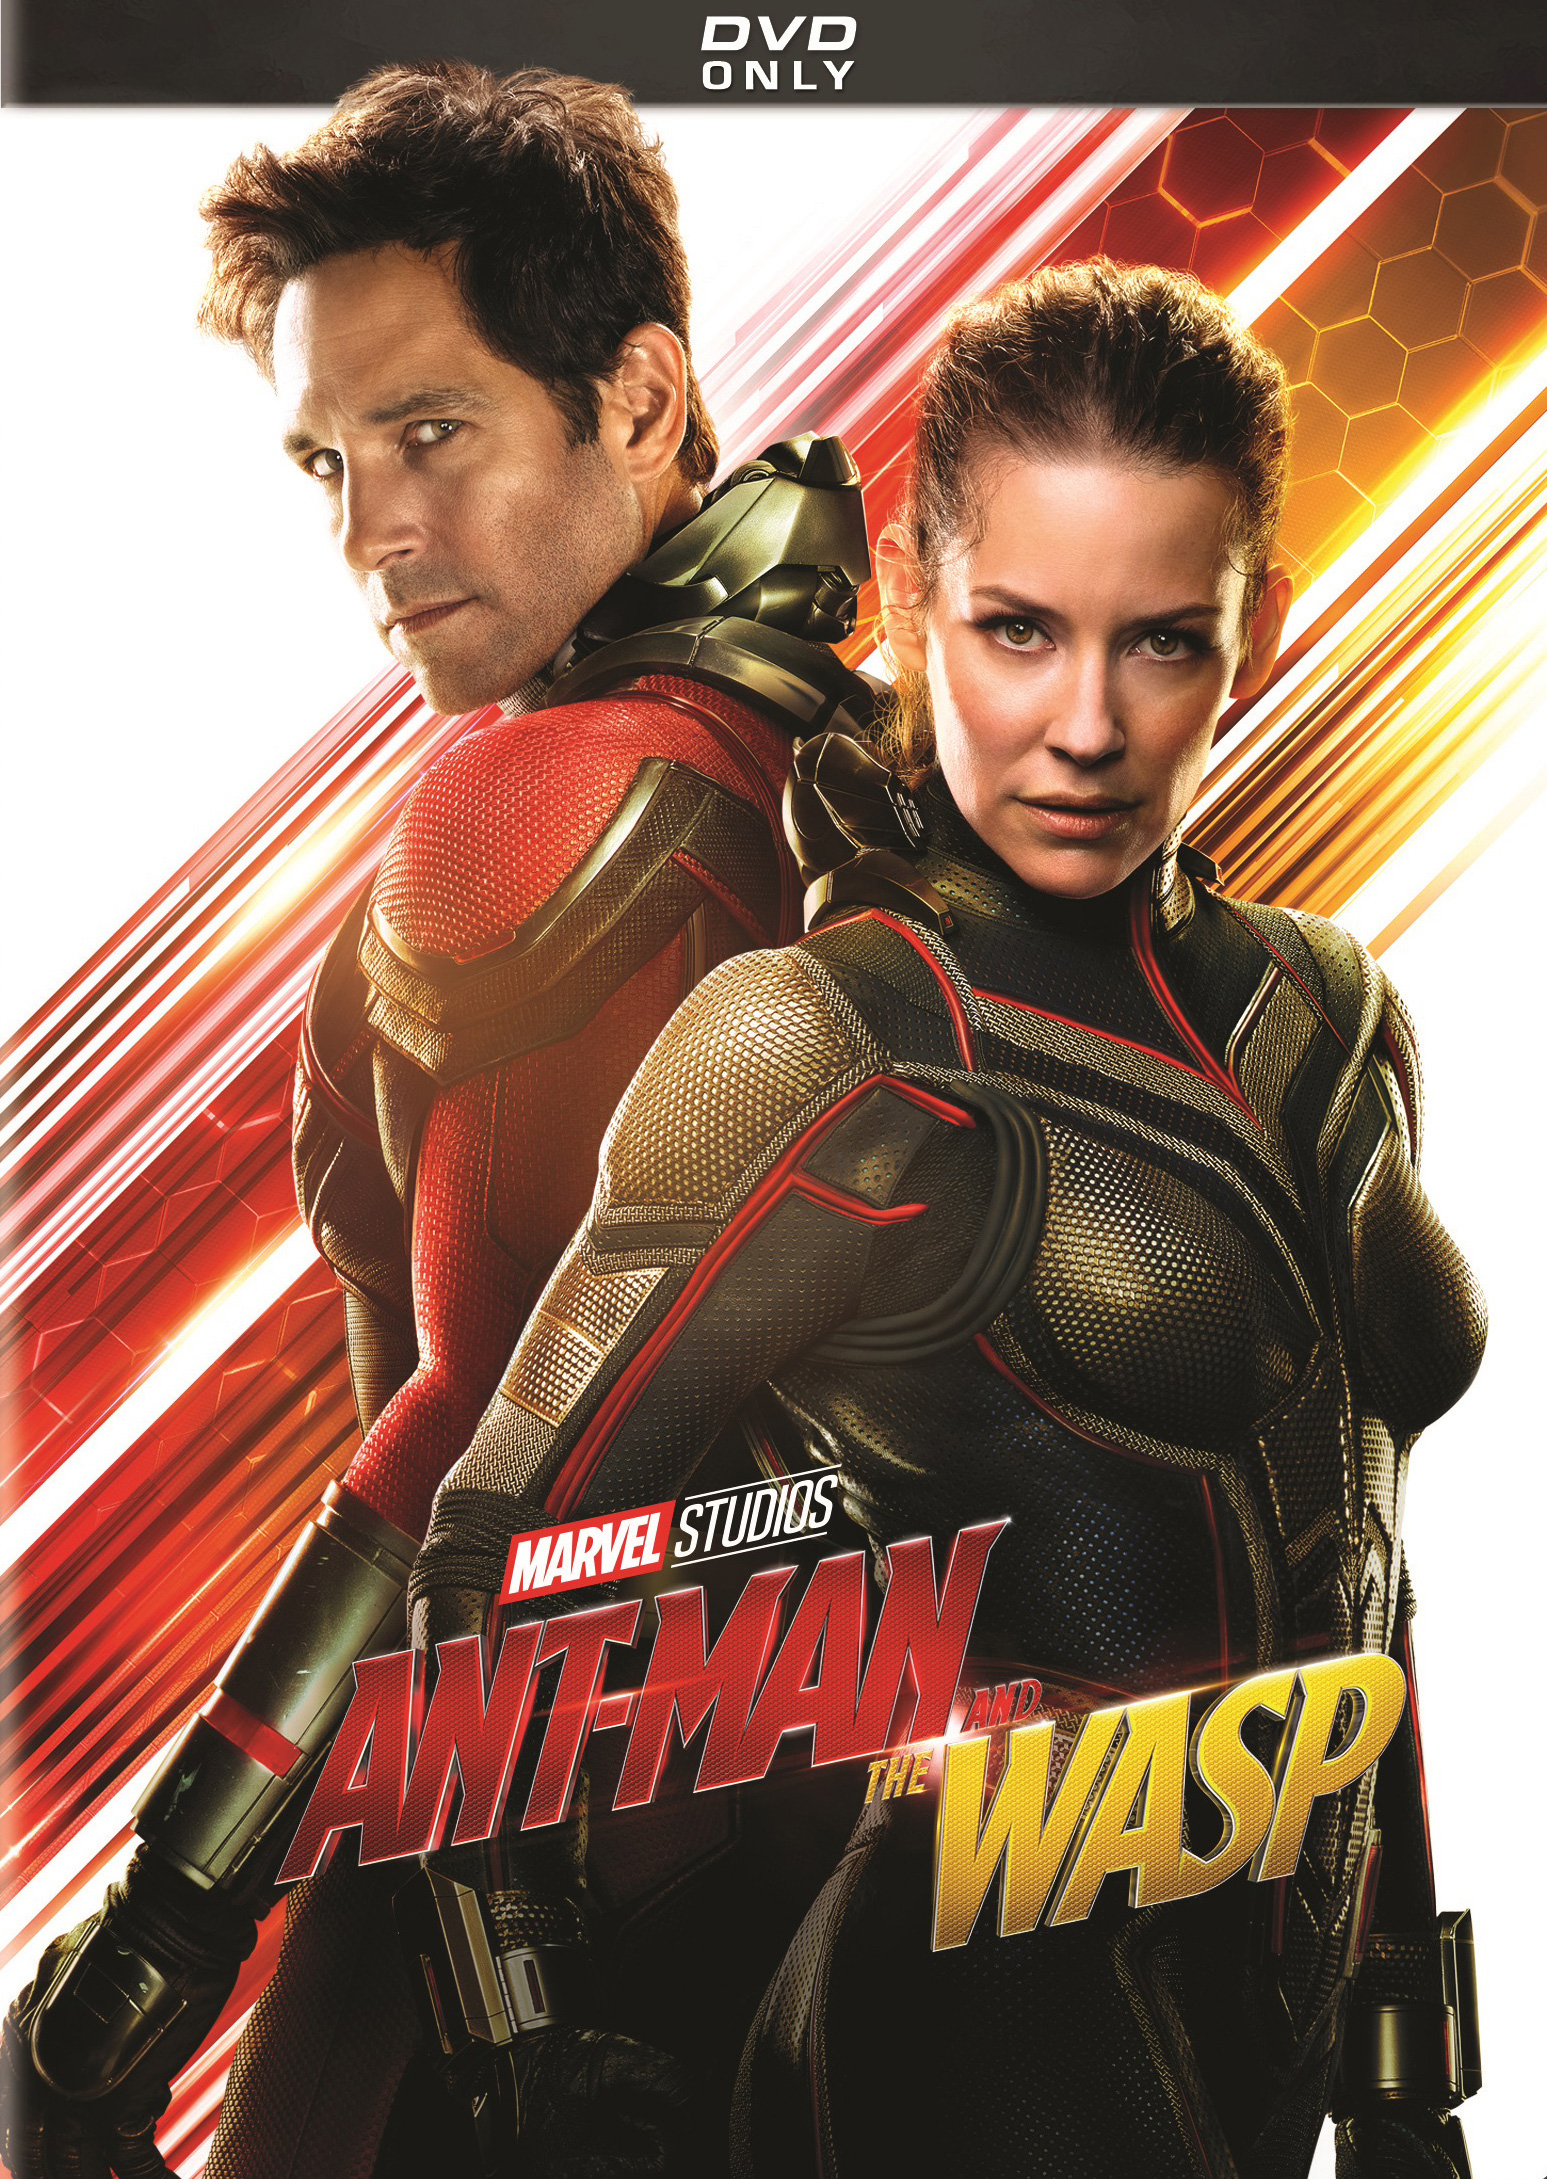 Ant Man And The Wasp [dvd] [2018] Best Buy